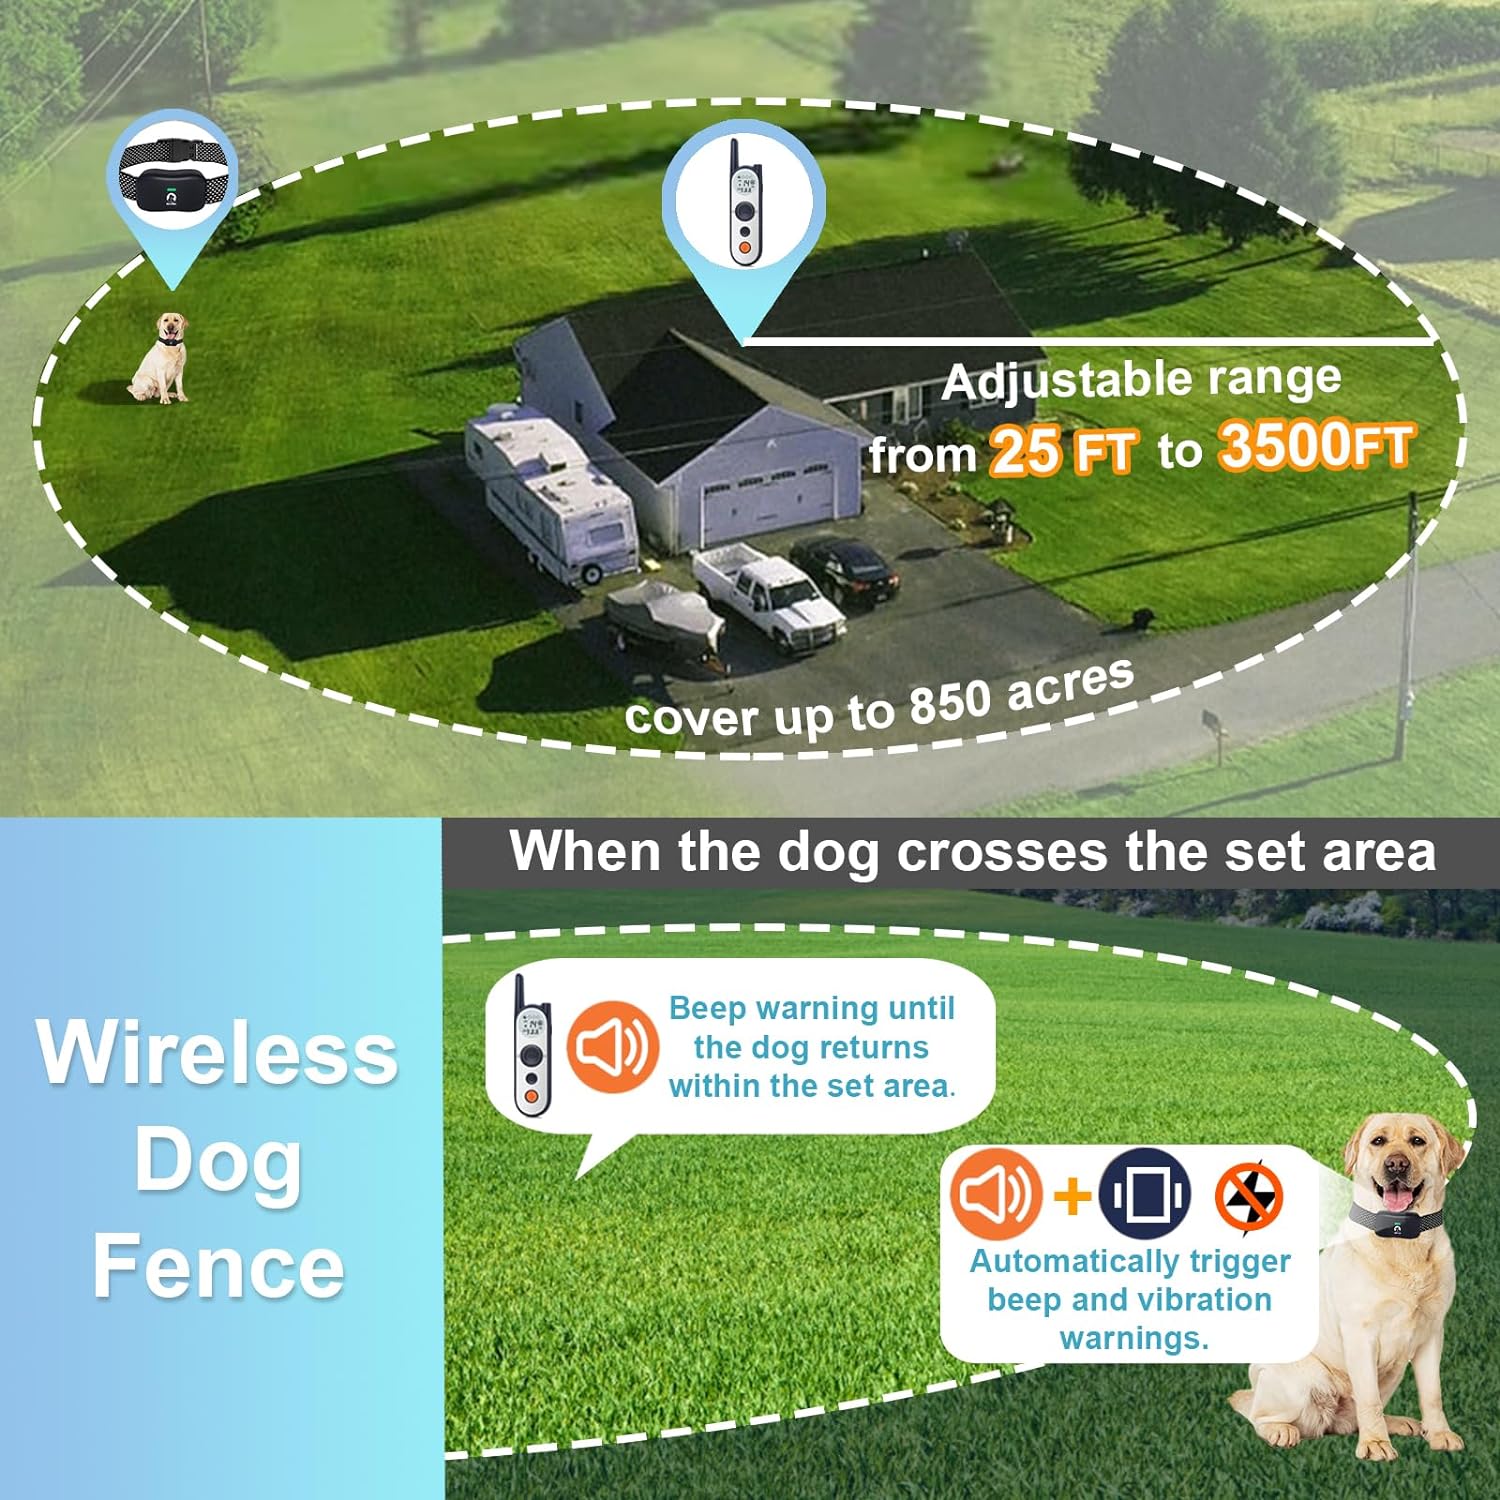 Wireless Dog Fence System - Covers up to 856-Acre Wireless Dog Collar Fence System,5900FT Shock Collar with Remote,Rechargeable Electric Dog Fence with 3 Training Modes for Large Medium Dogs